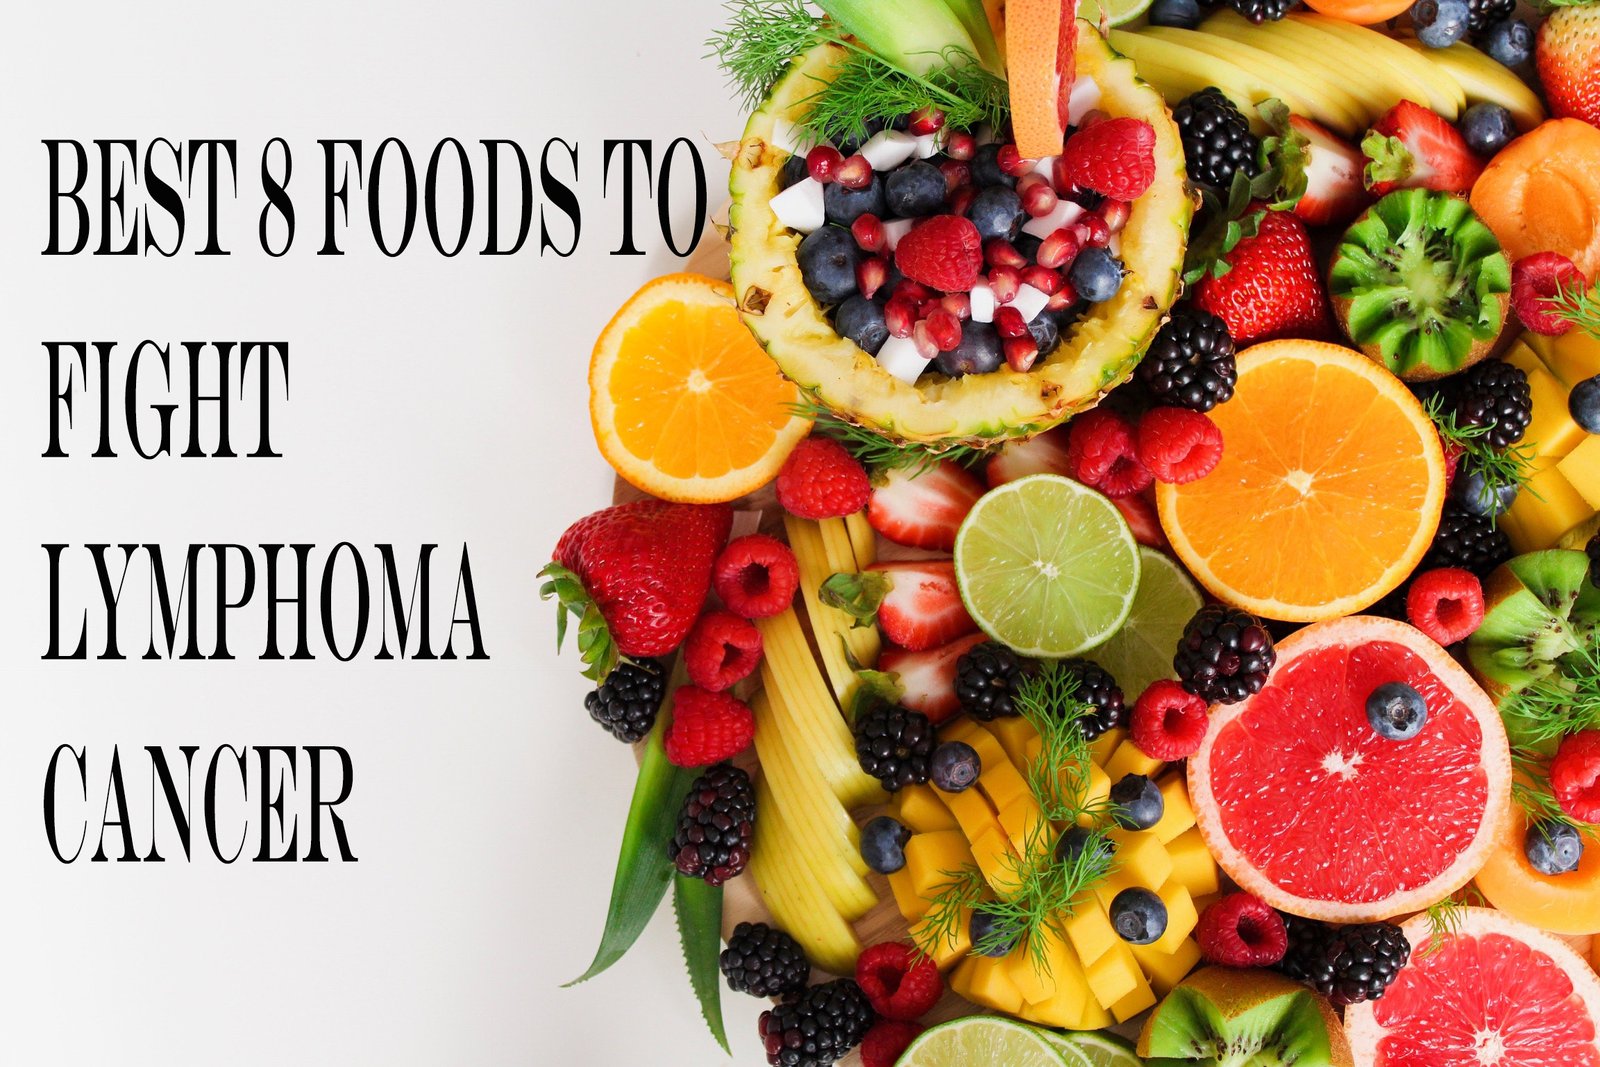 8 Best Foods to Fight Lymphoma Cancer